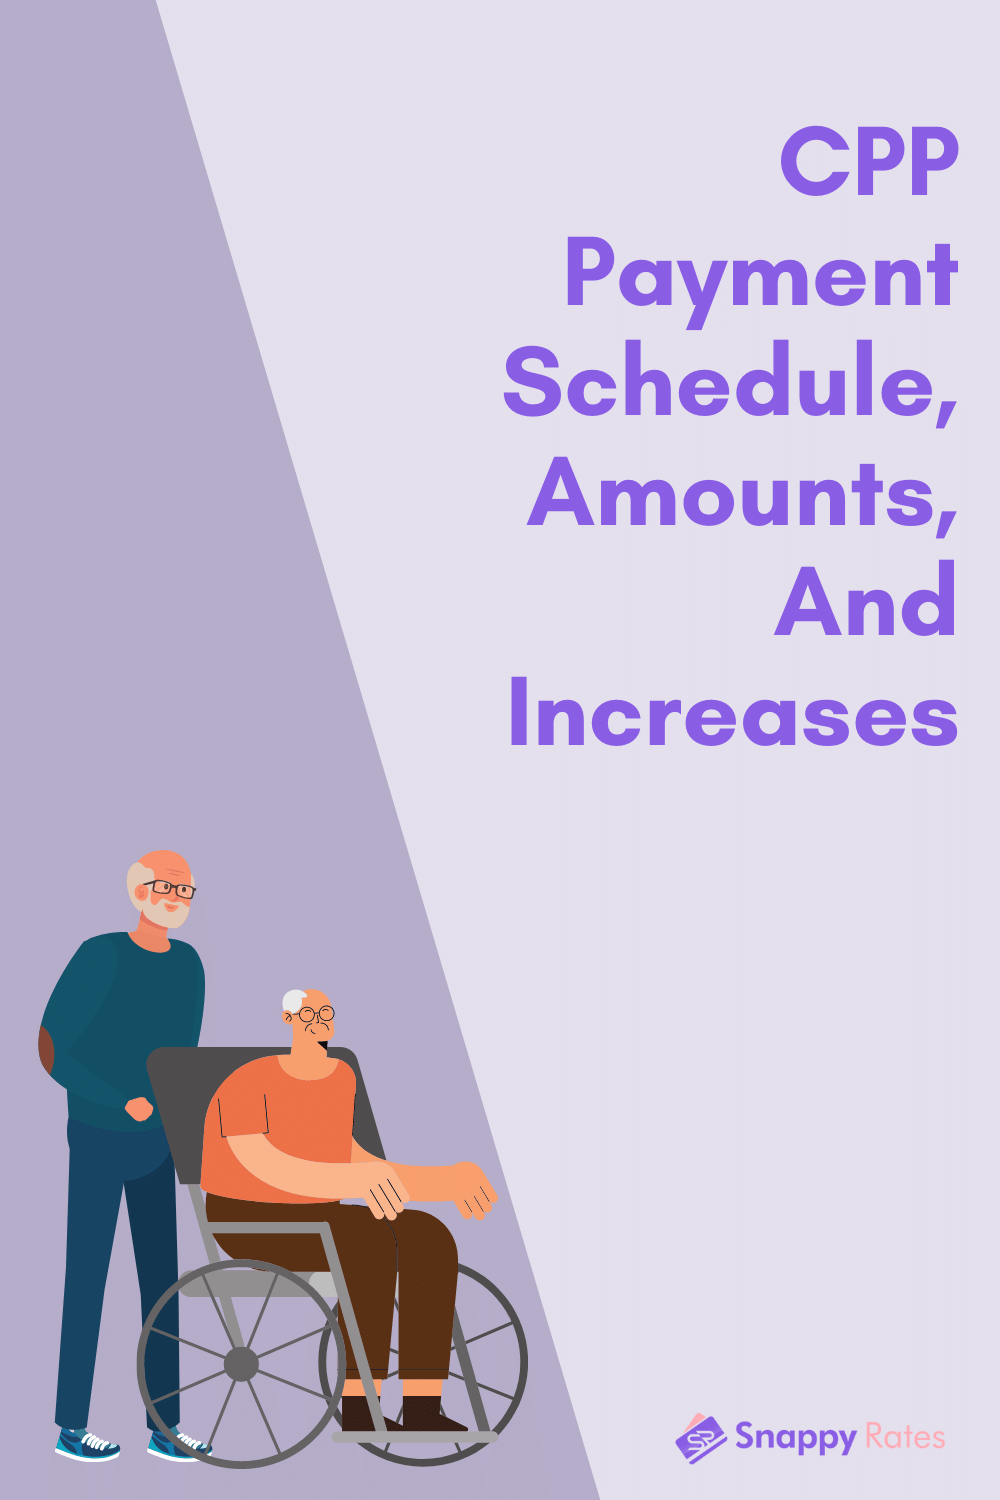 2023 CPP Payment Schedule, Amounts, and Increases